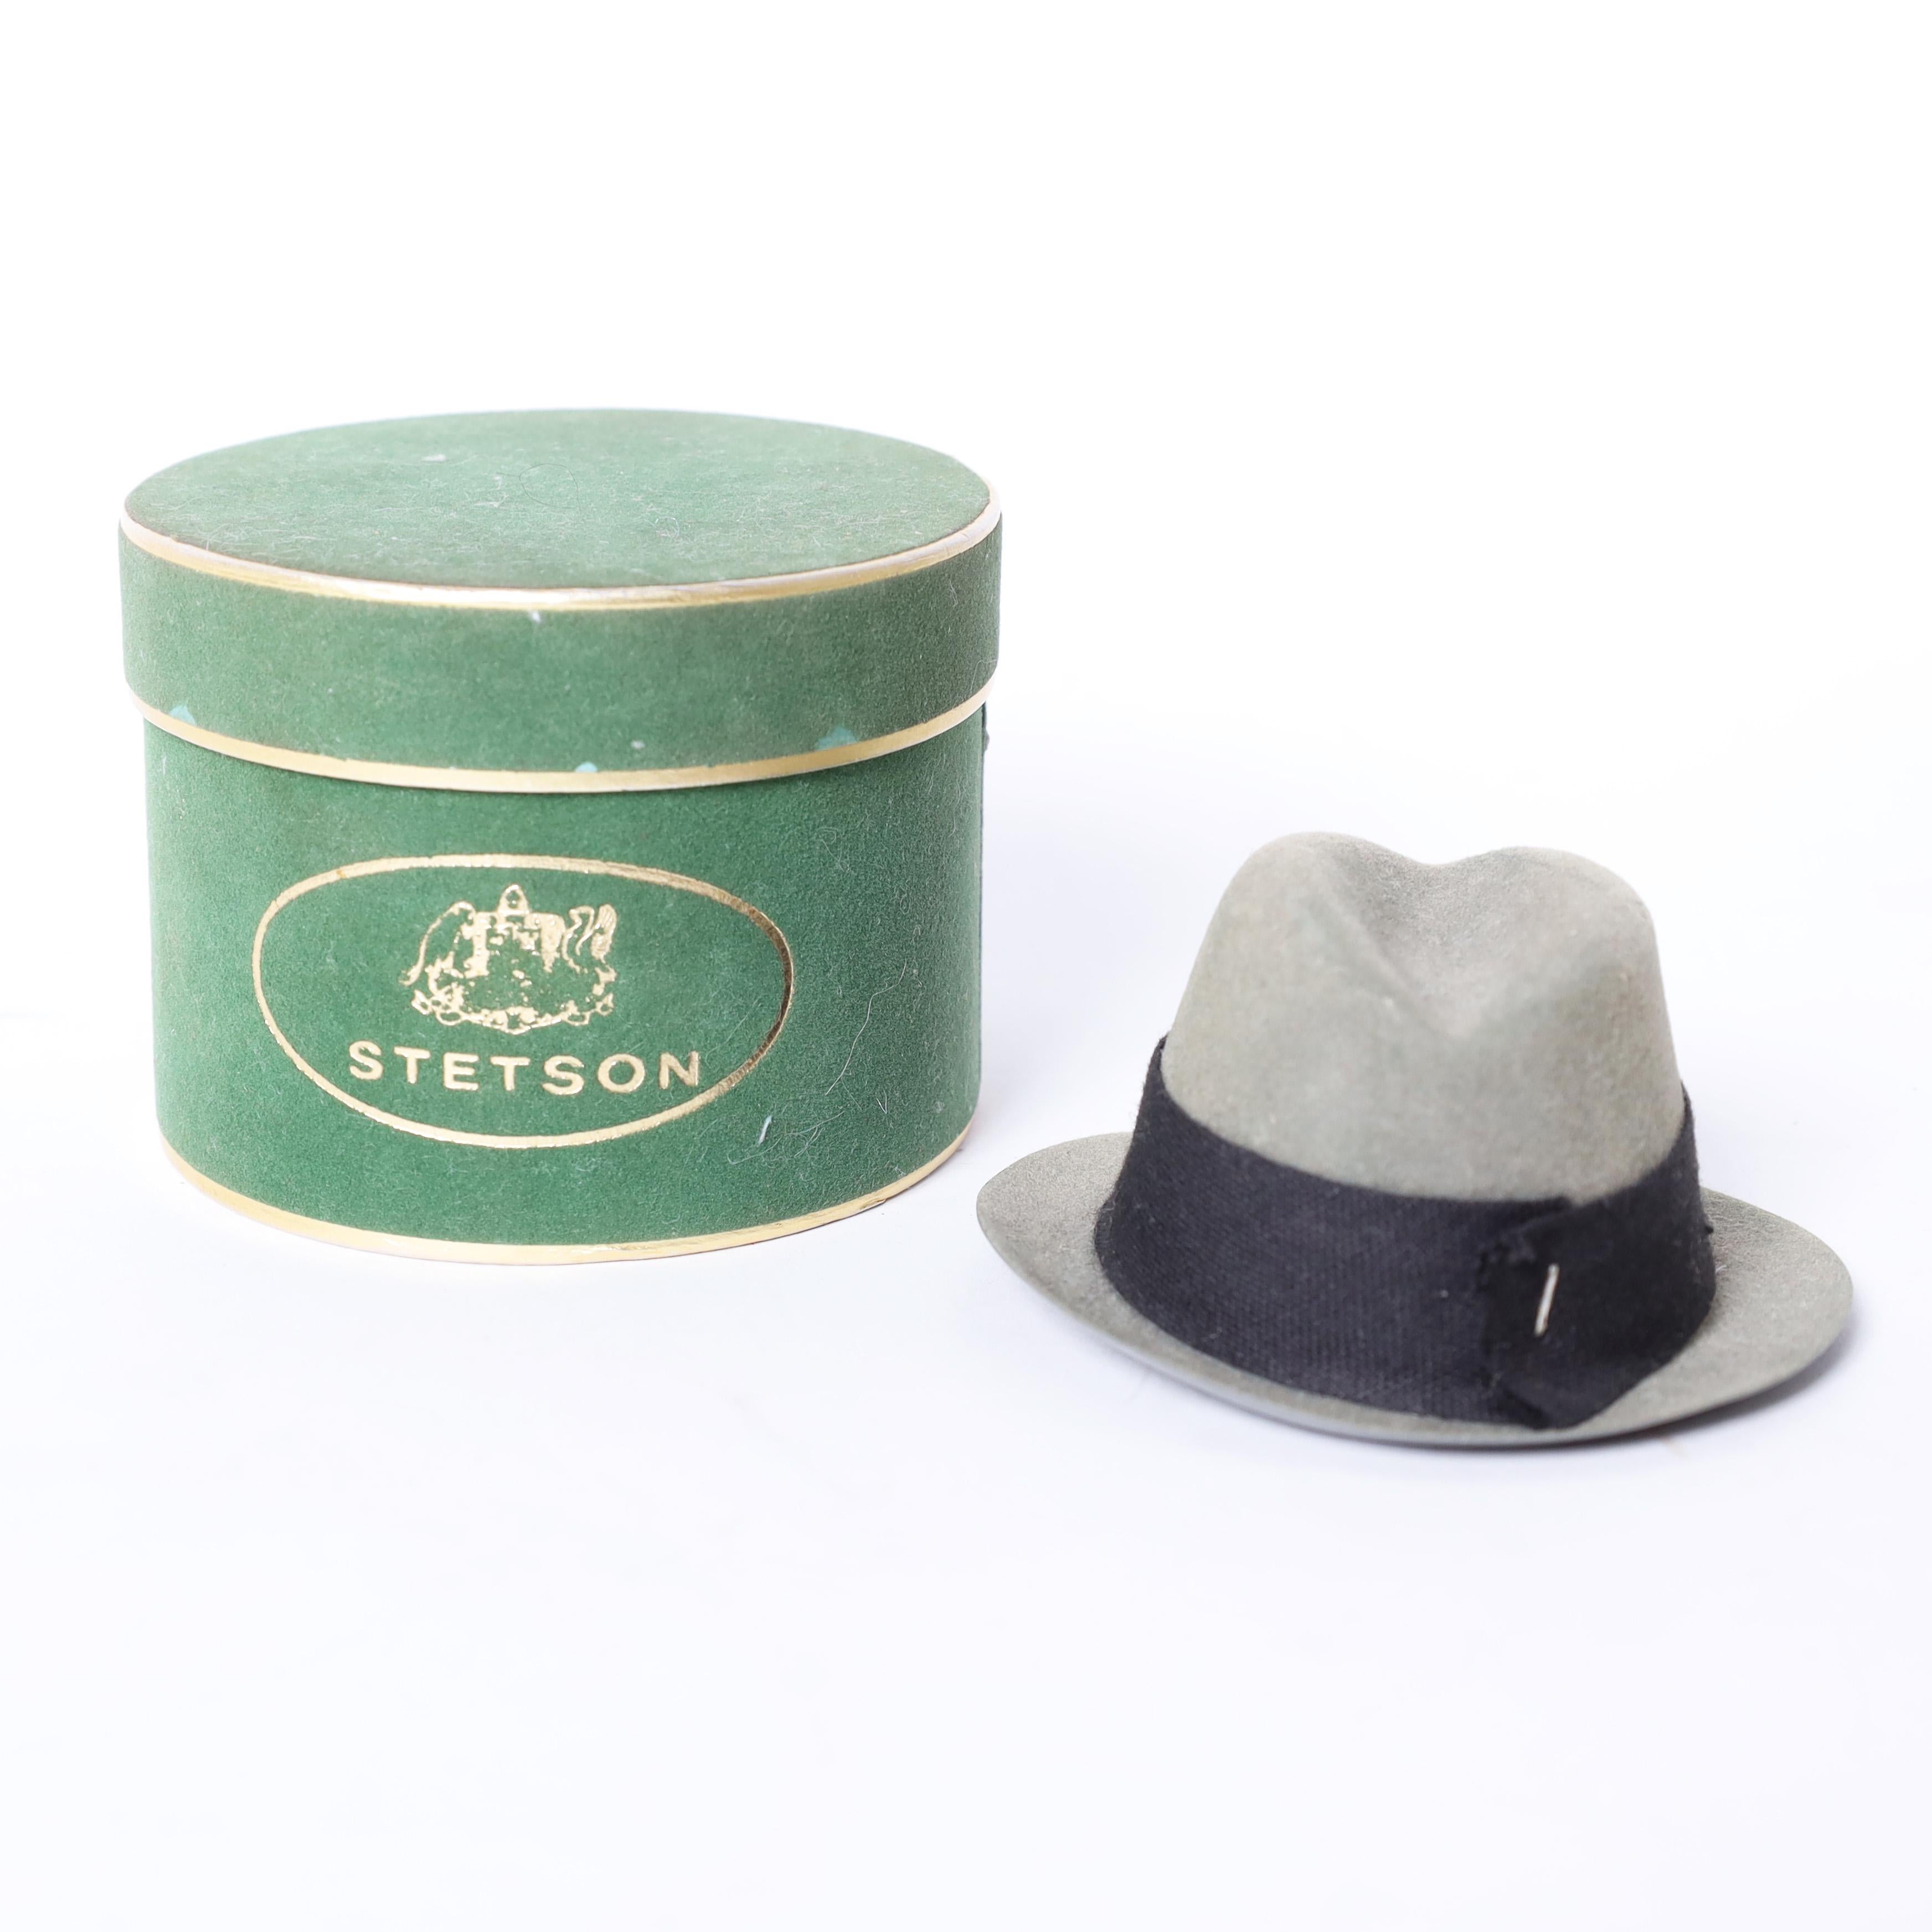 Rare and unusual collection of vintage miniature hat boxes with hats representing America's iconic hat companies of the time. Customers would buy them to give as gifts, then the recipient would bring it to the store and choose a hat. Part of a